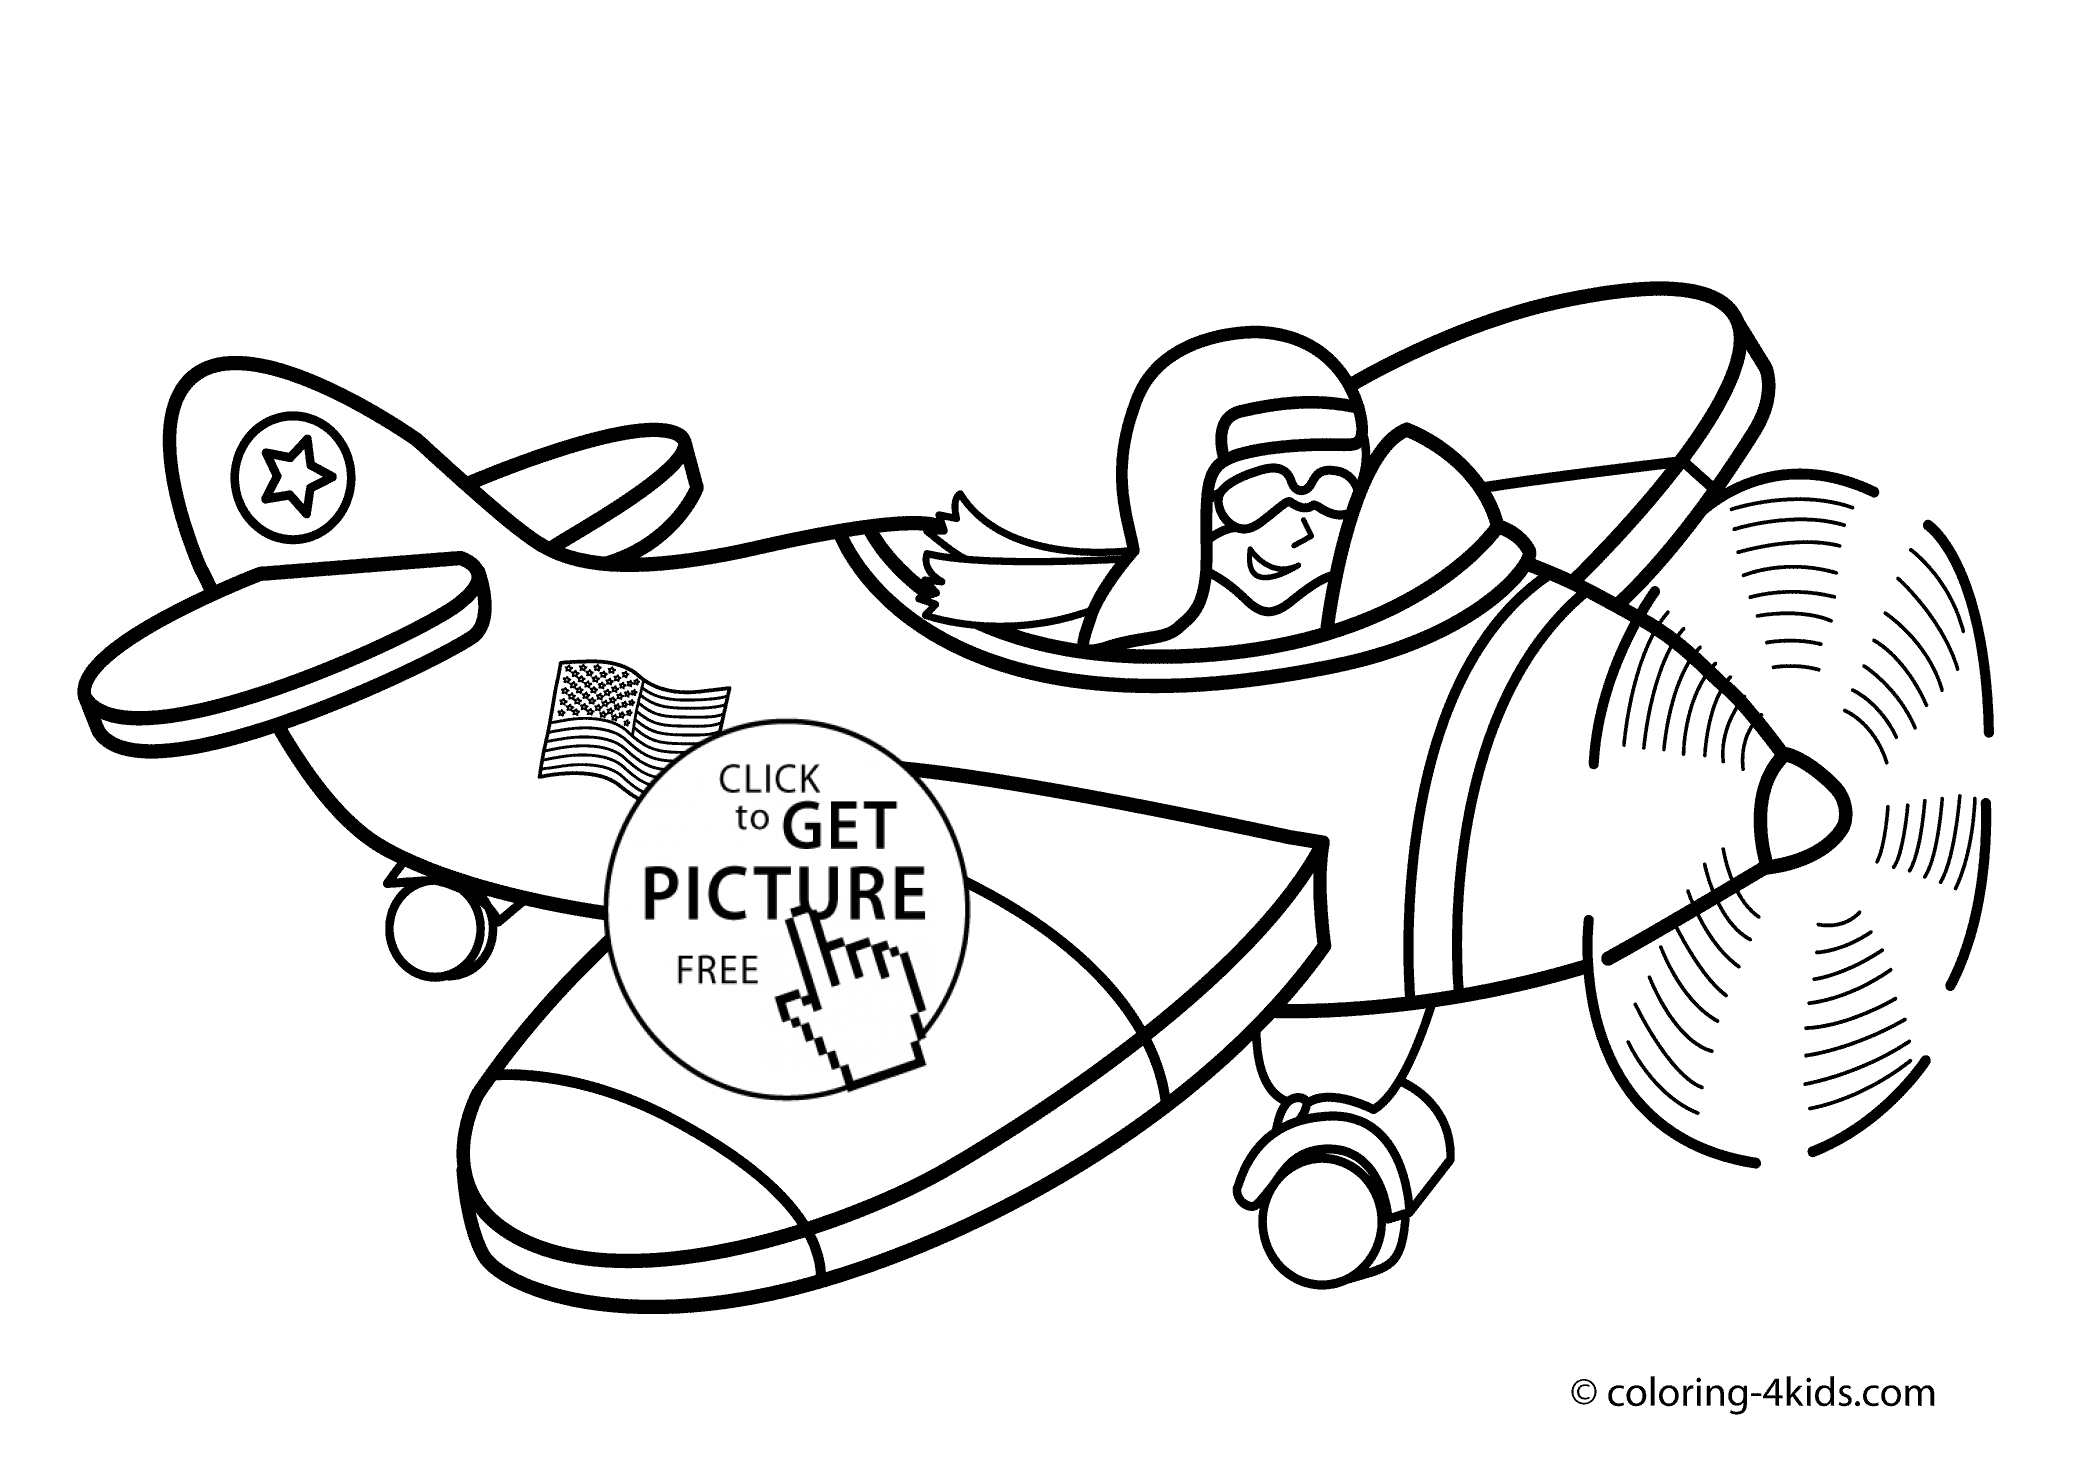 Airplane Transportation Coloring Pages With Pilot For Kids ...